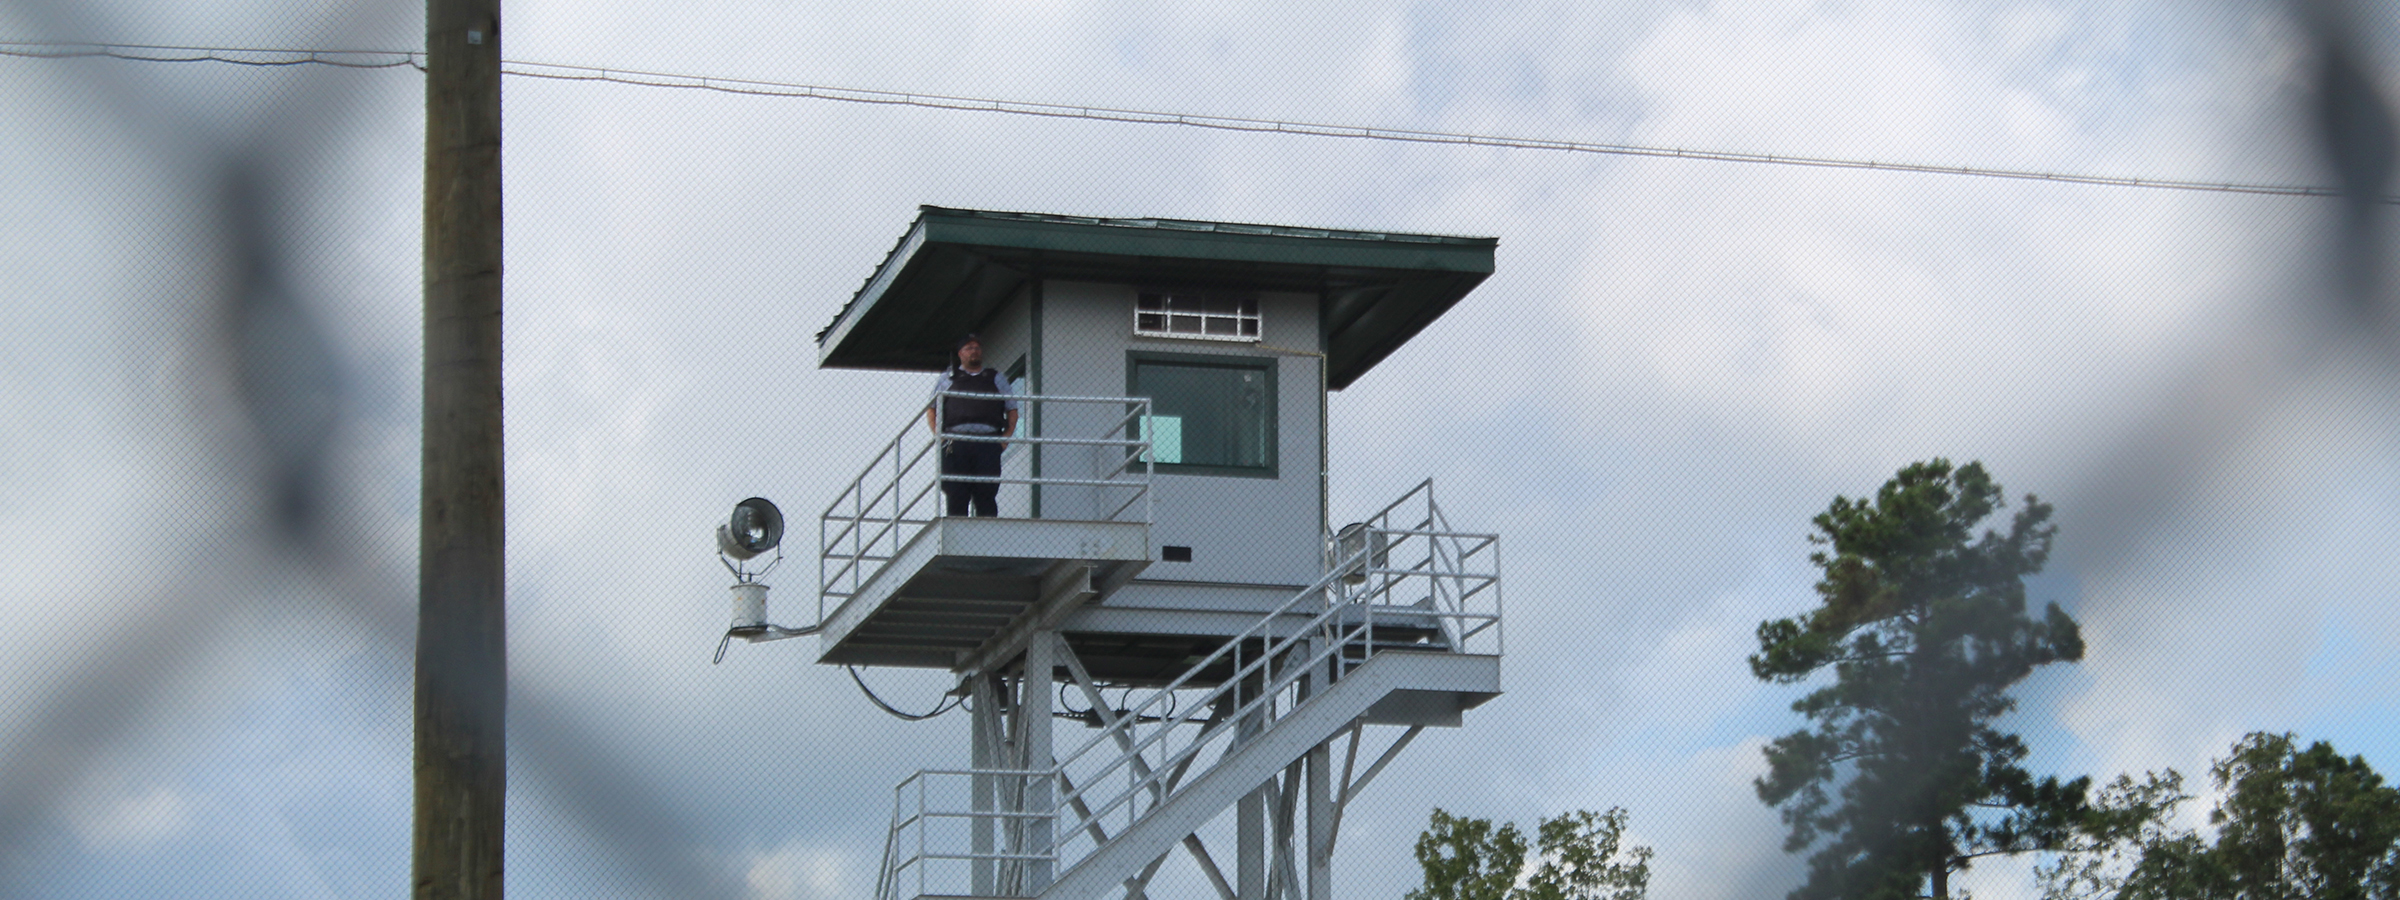 Guard Overseeing Prison from Guard Tower